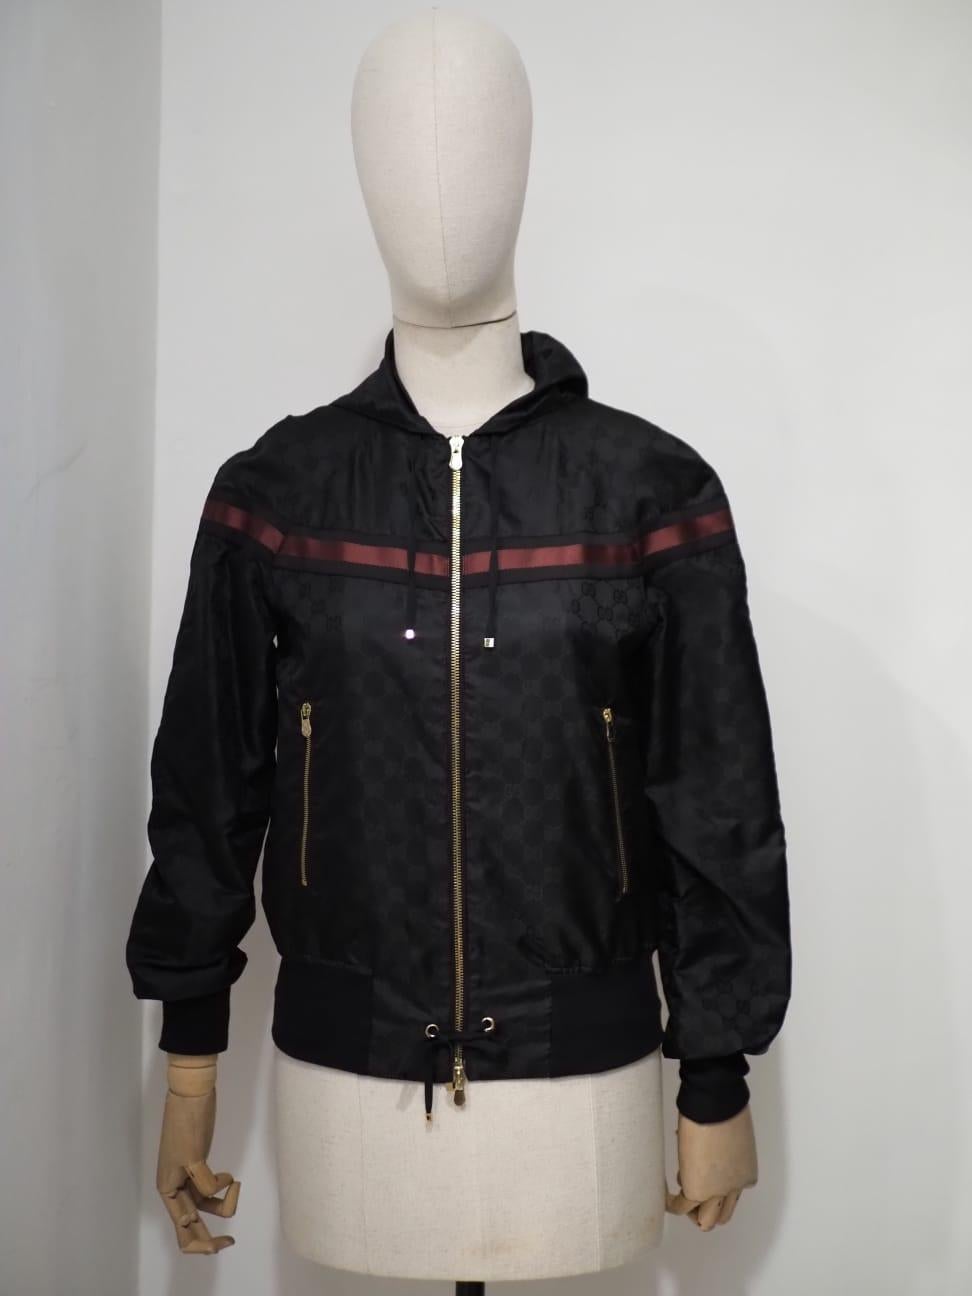 Gucci black monogram jacket
Totally made in Italy in size XS